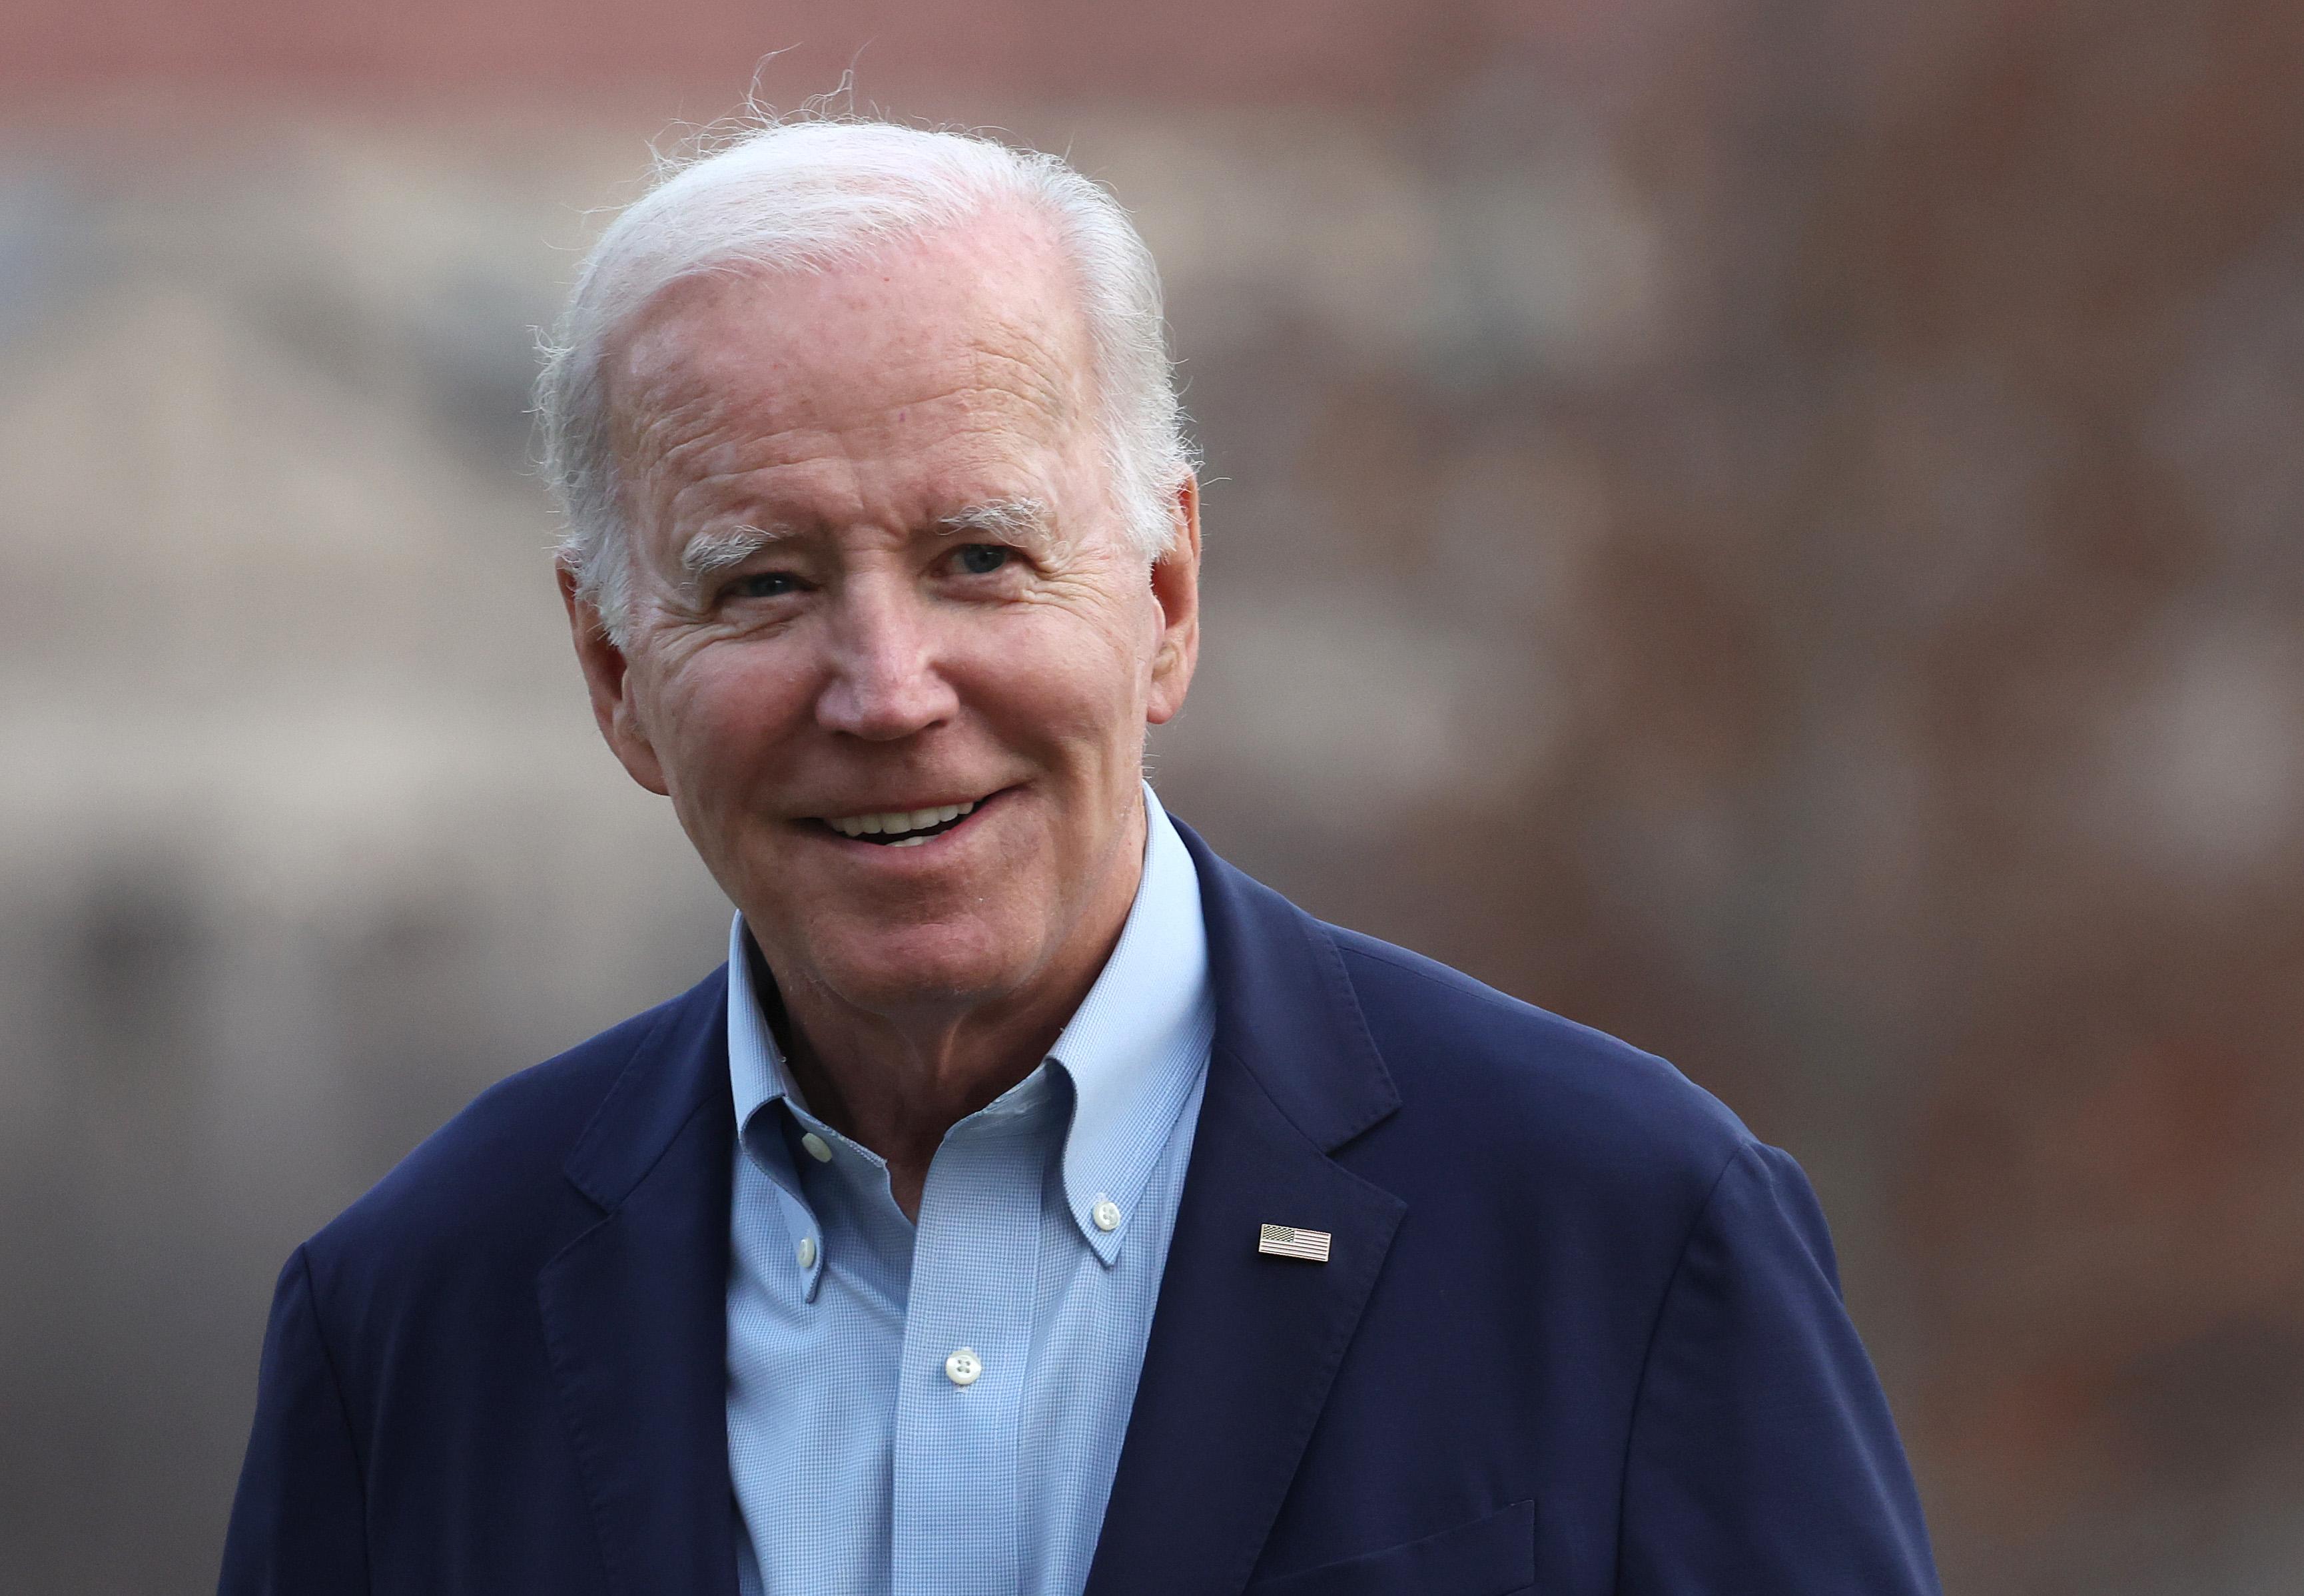 Joe Bidens Approval Rating Ticks Up in First Poll